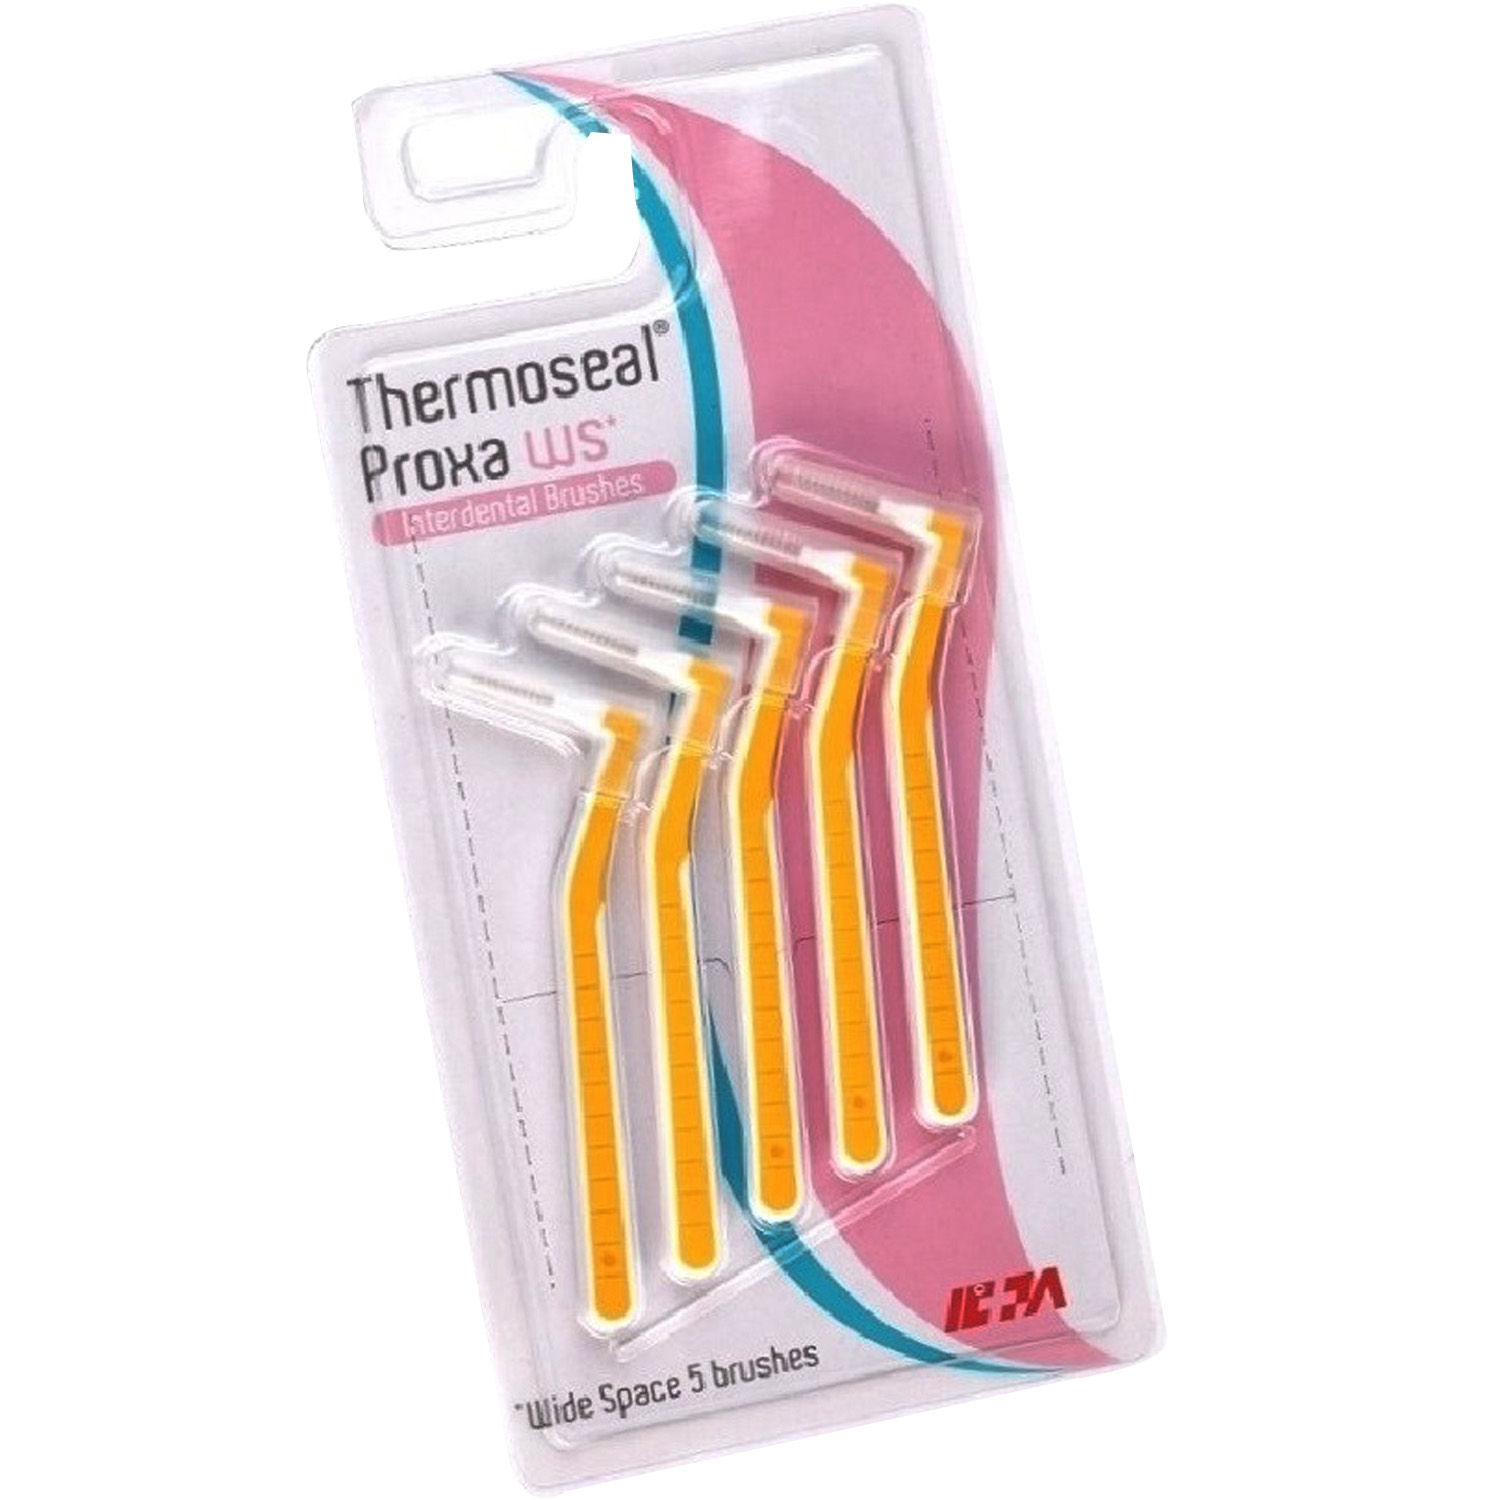 Buy Thermoseal Proxa Wide Space Interdental Brushes, 5 Count Online